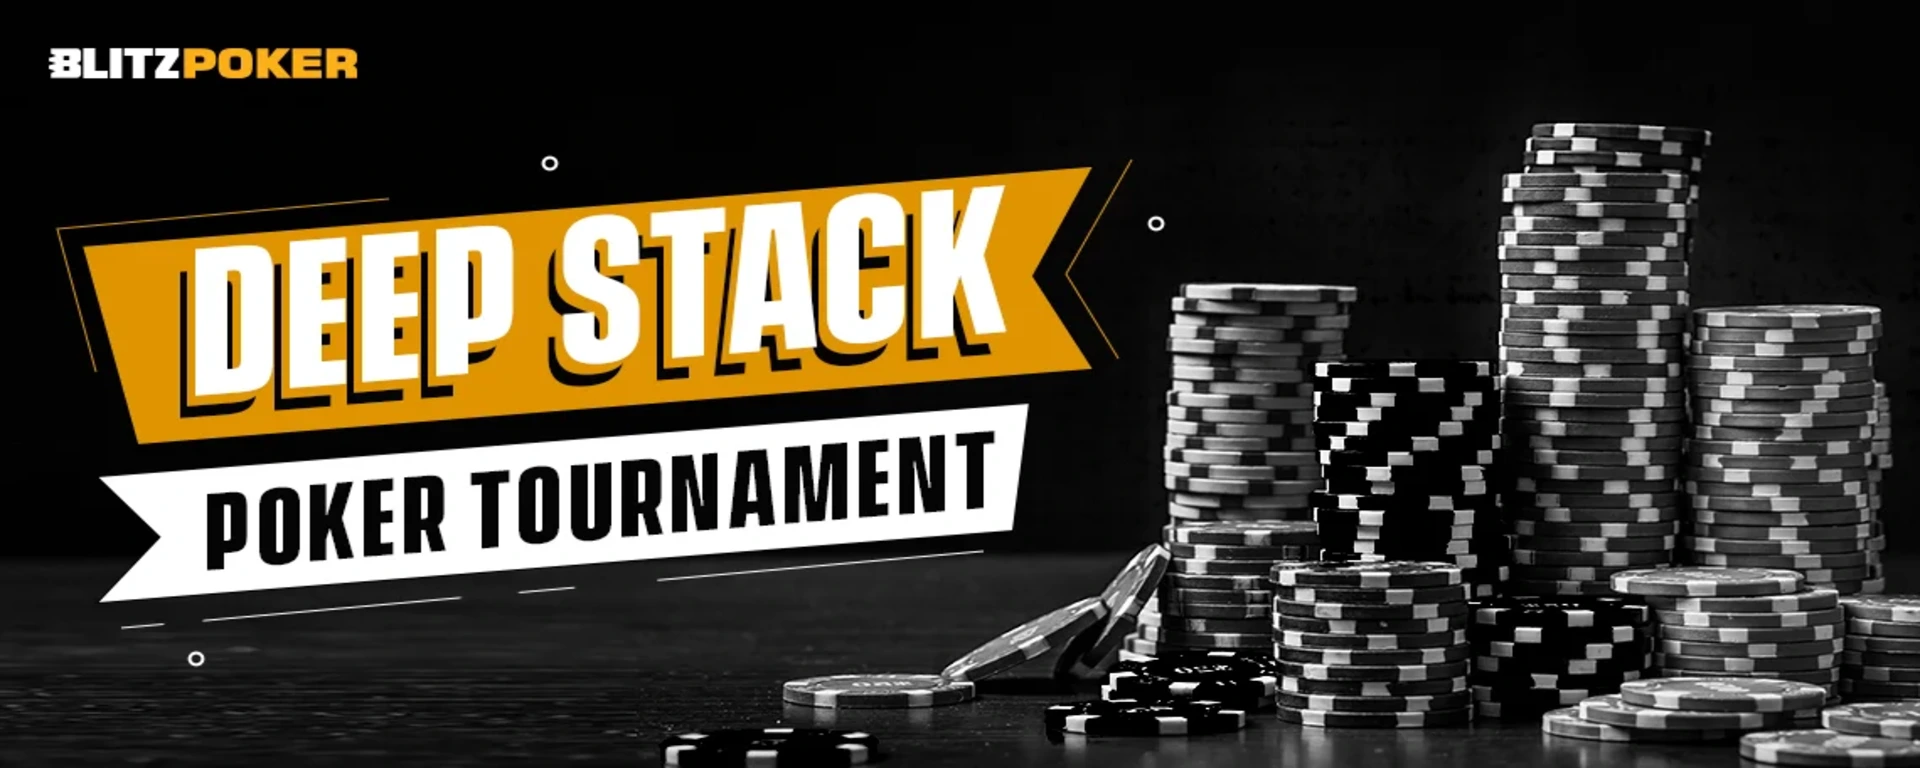 What Is a Deep Stack Poker Tournament